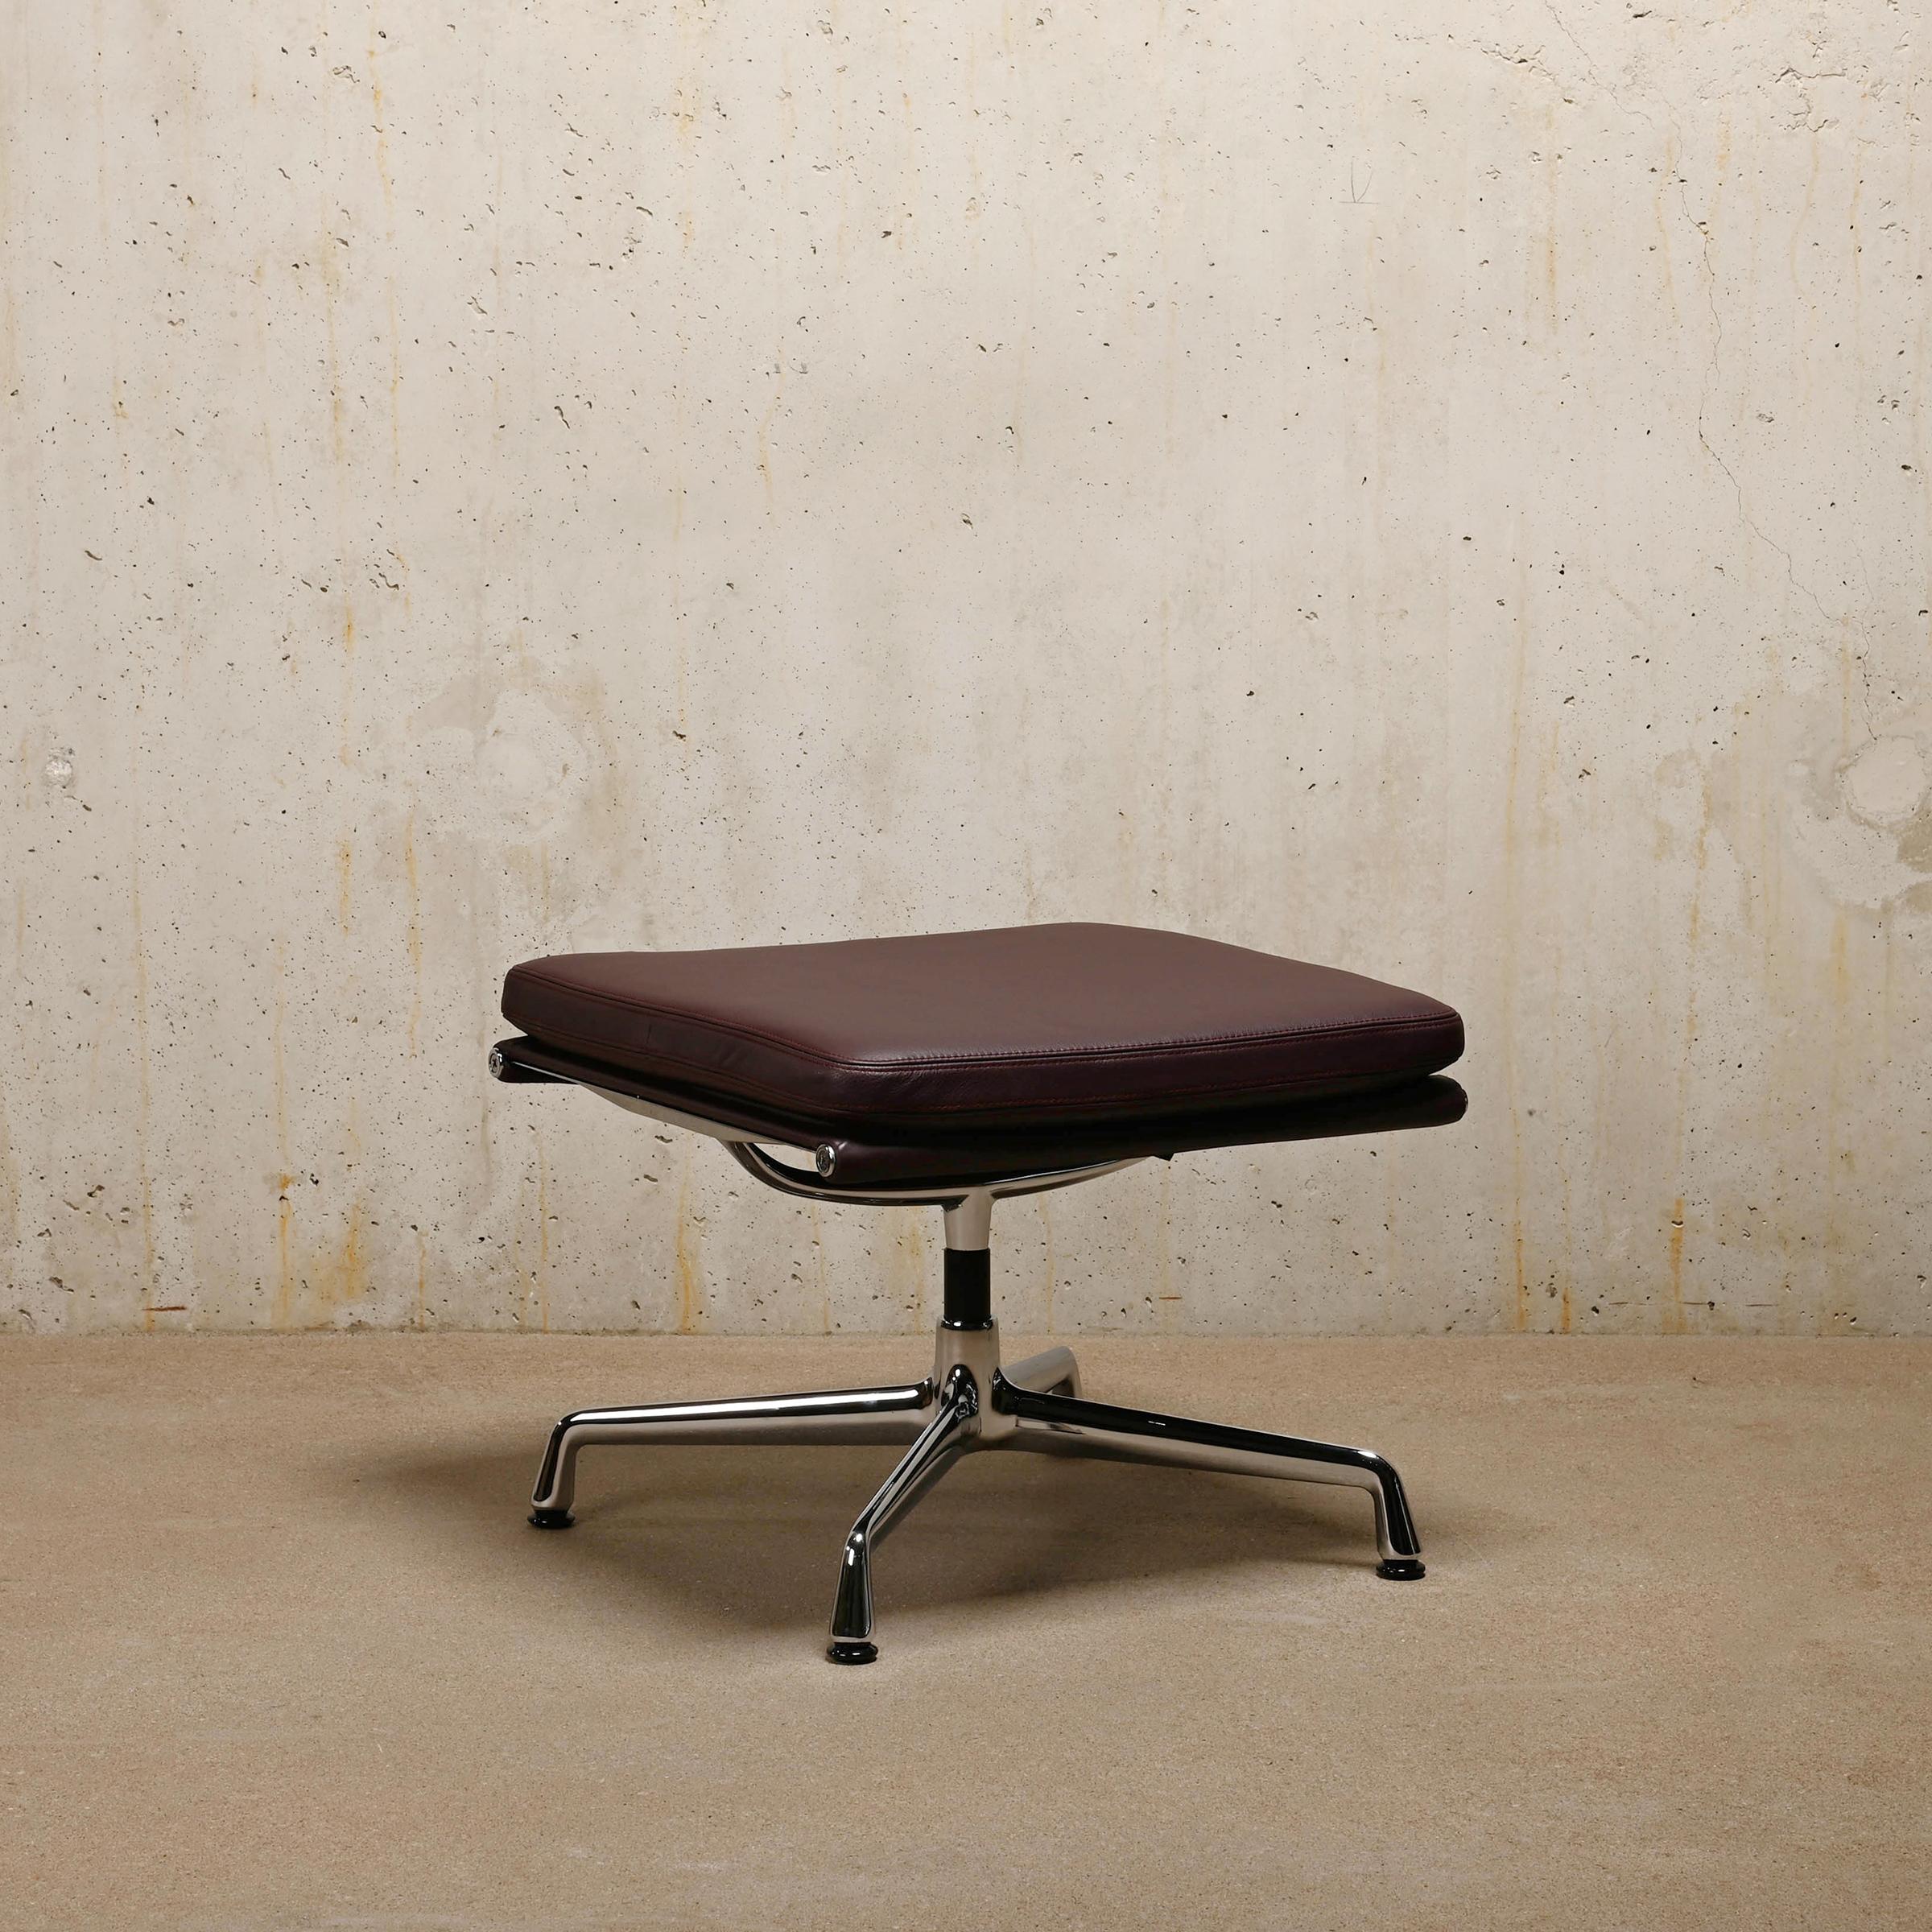 Charles & Ray Eames EA222 Lounge Chair and EA223 Ottoman in Plume Leather, Vitra For Sale 2